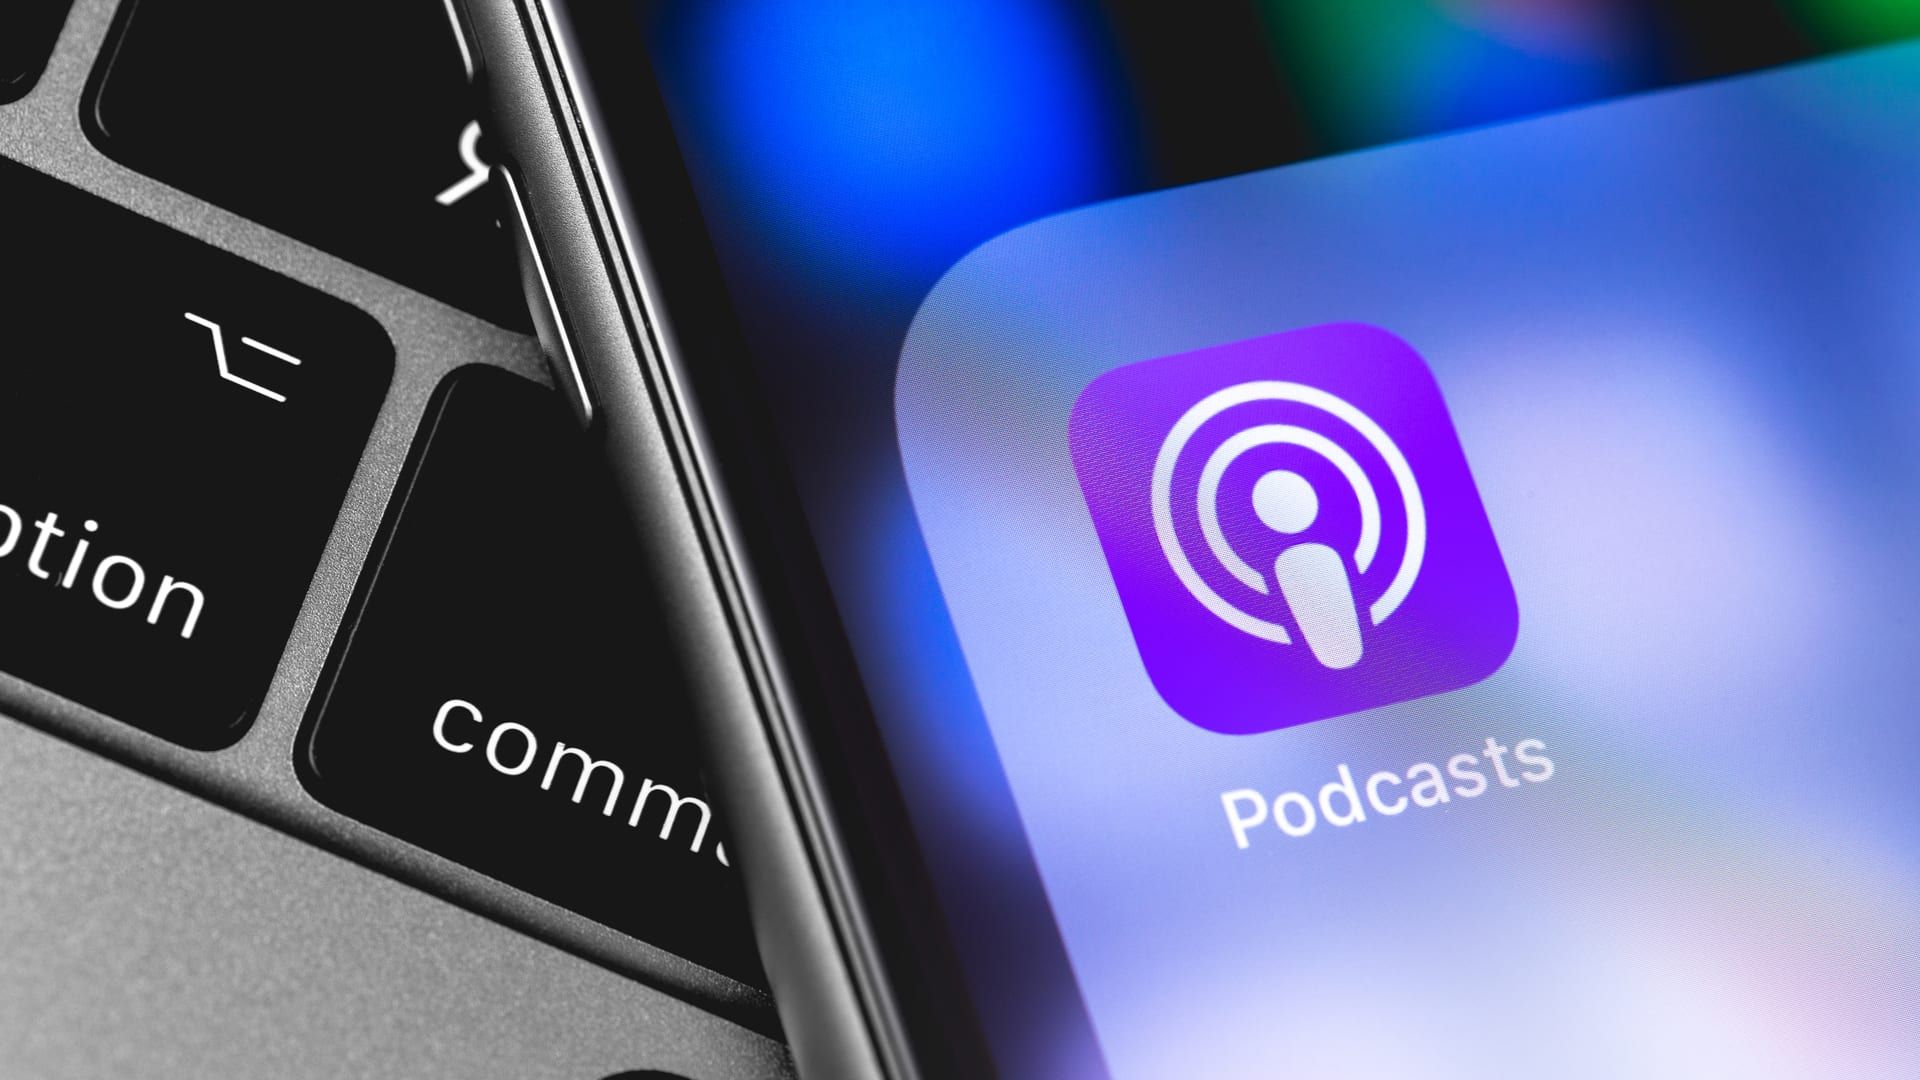 What Is The Podcast App On IPhone